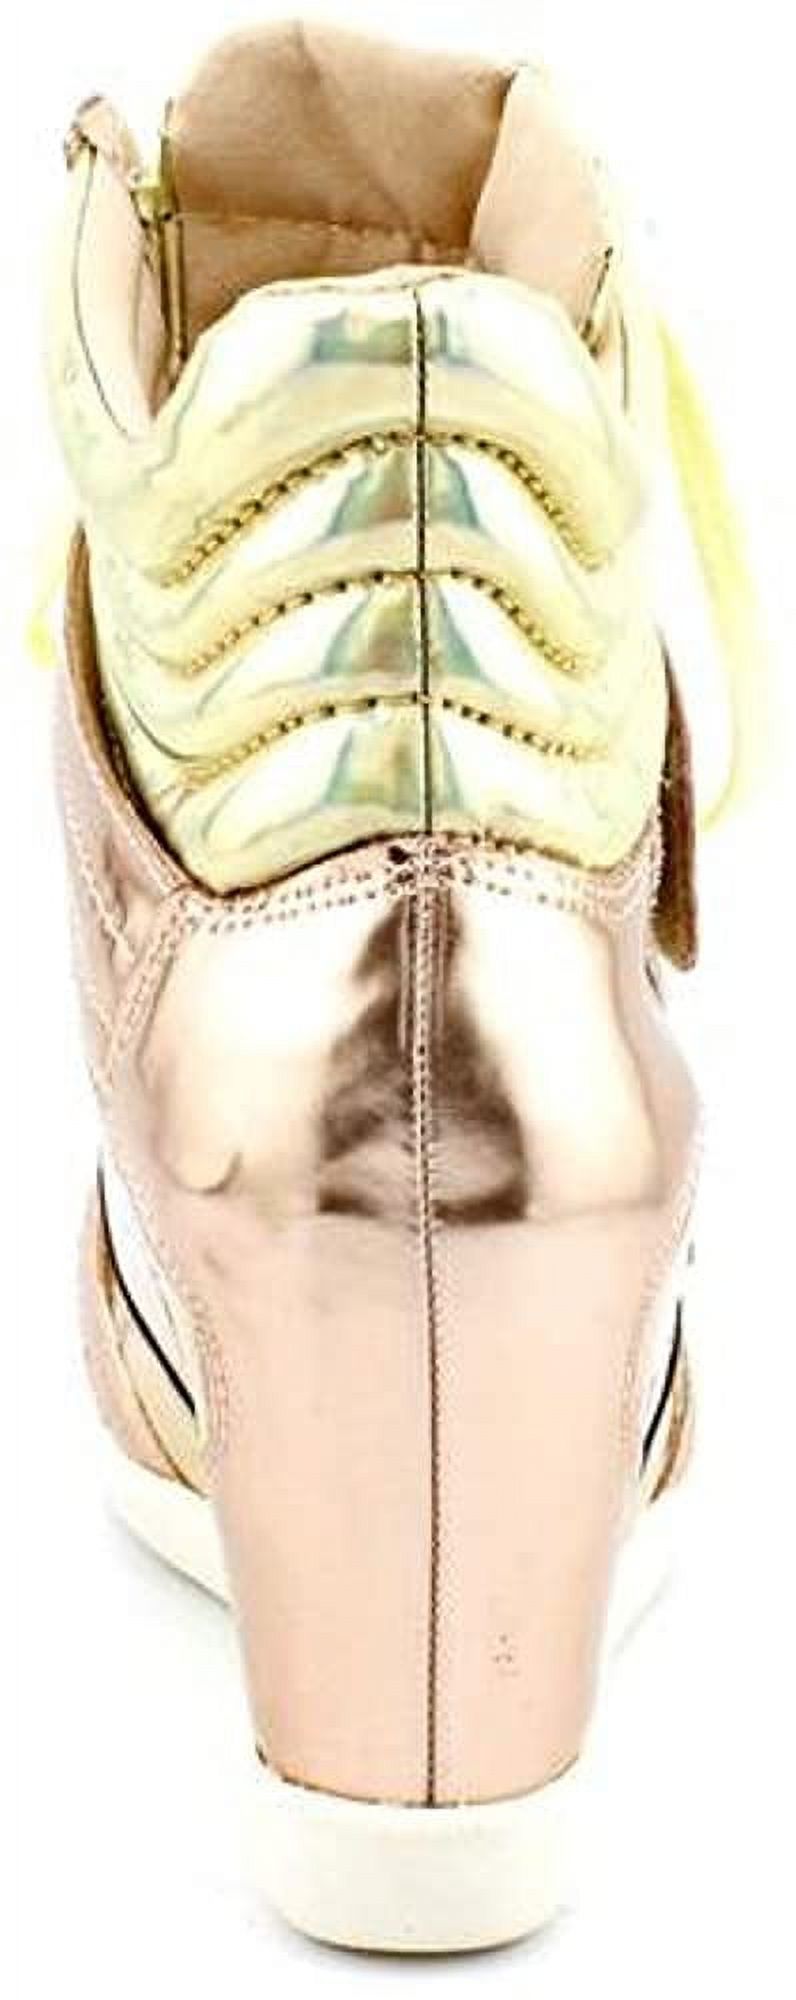 Boutique 9 Nevan 1 Women's Fashion Lace Up Wedge Sneakers Shoes - Gold - image 5 of 5